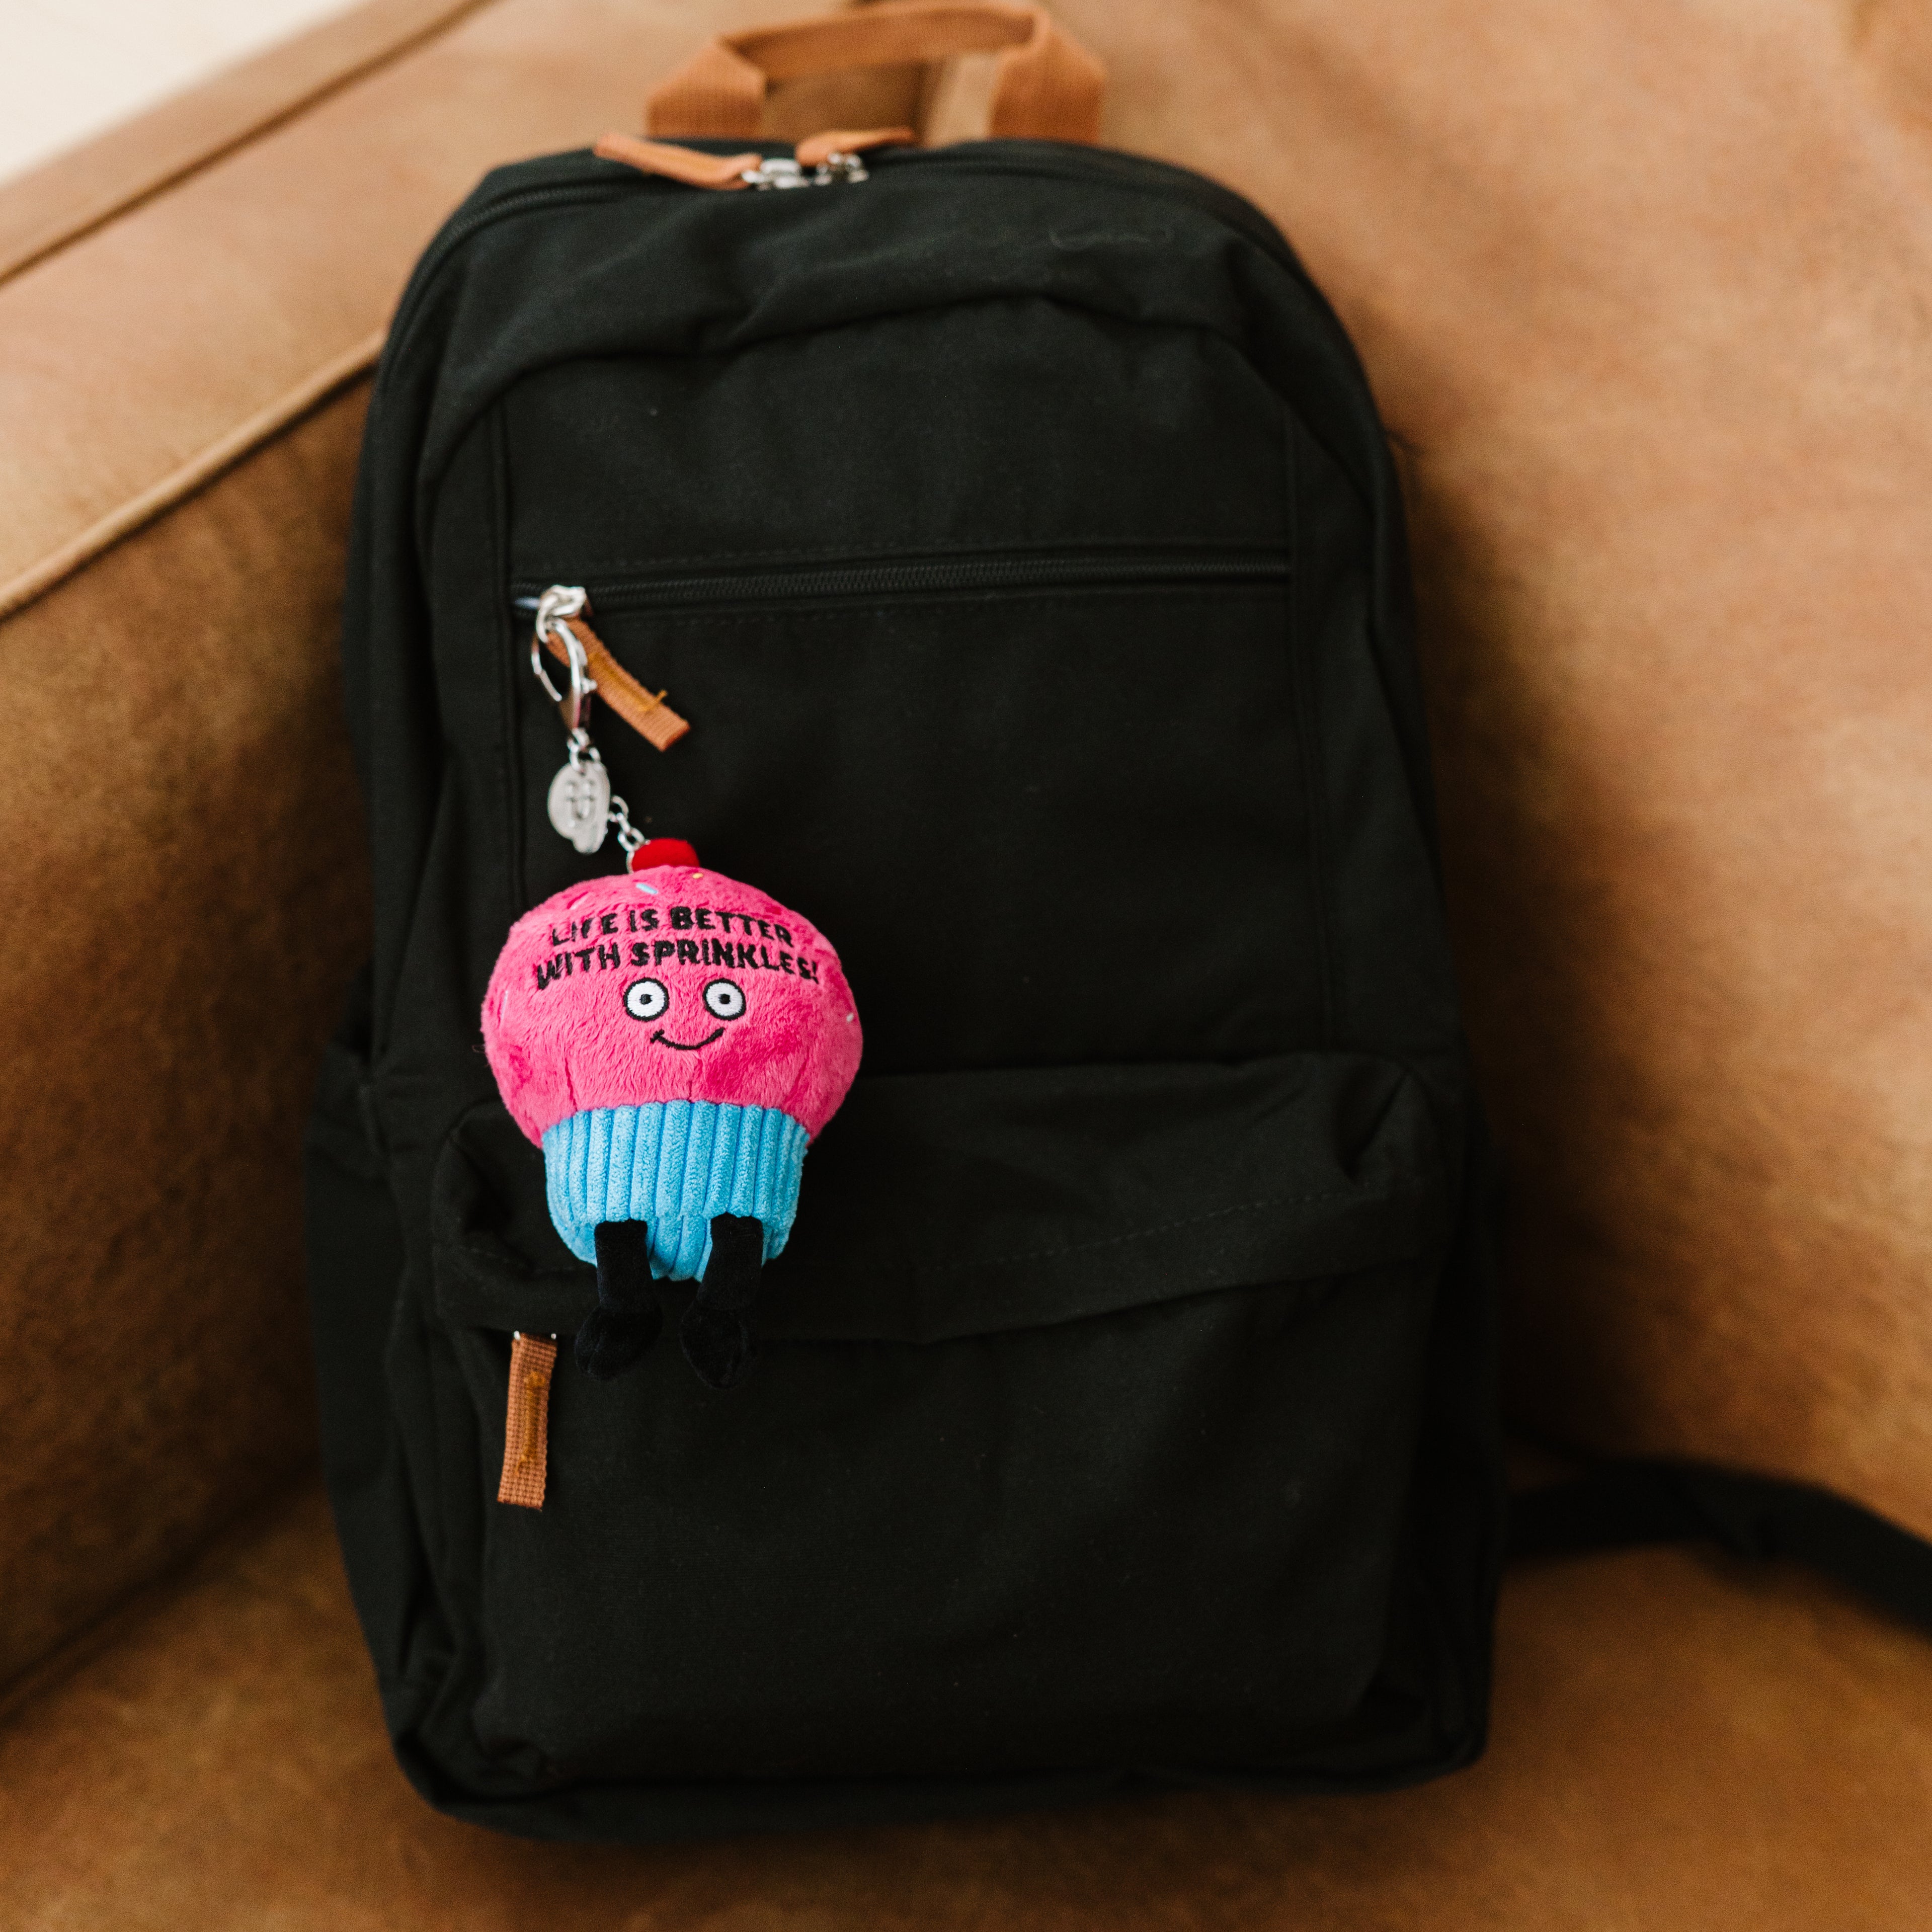 &quot;Life is Better With Sprinkles&quot; Cupcake Plush Bag Charm